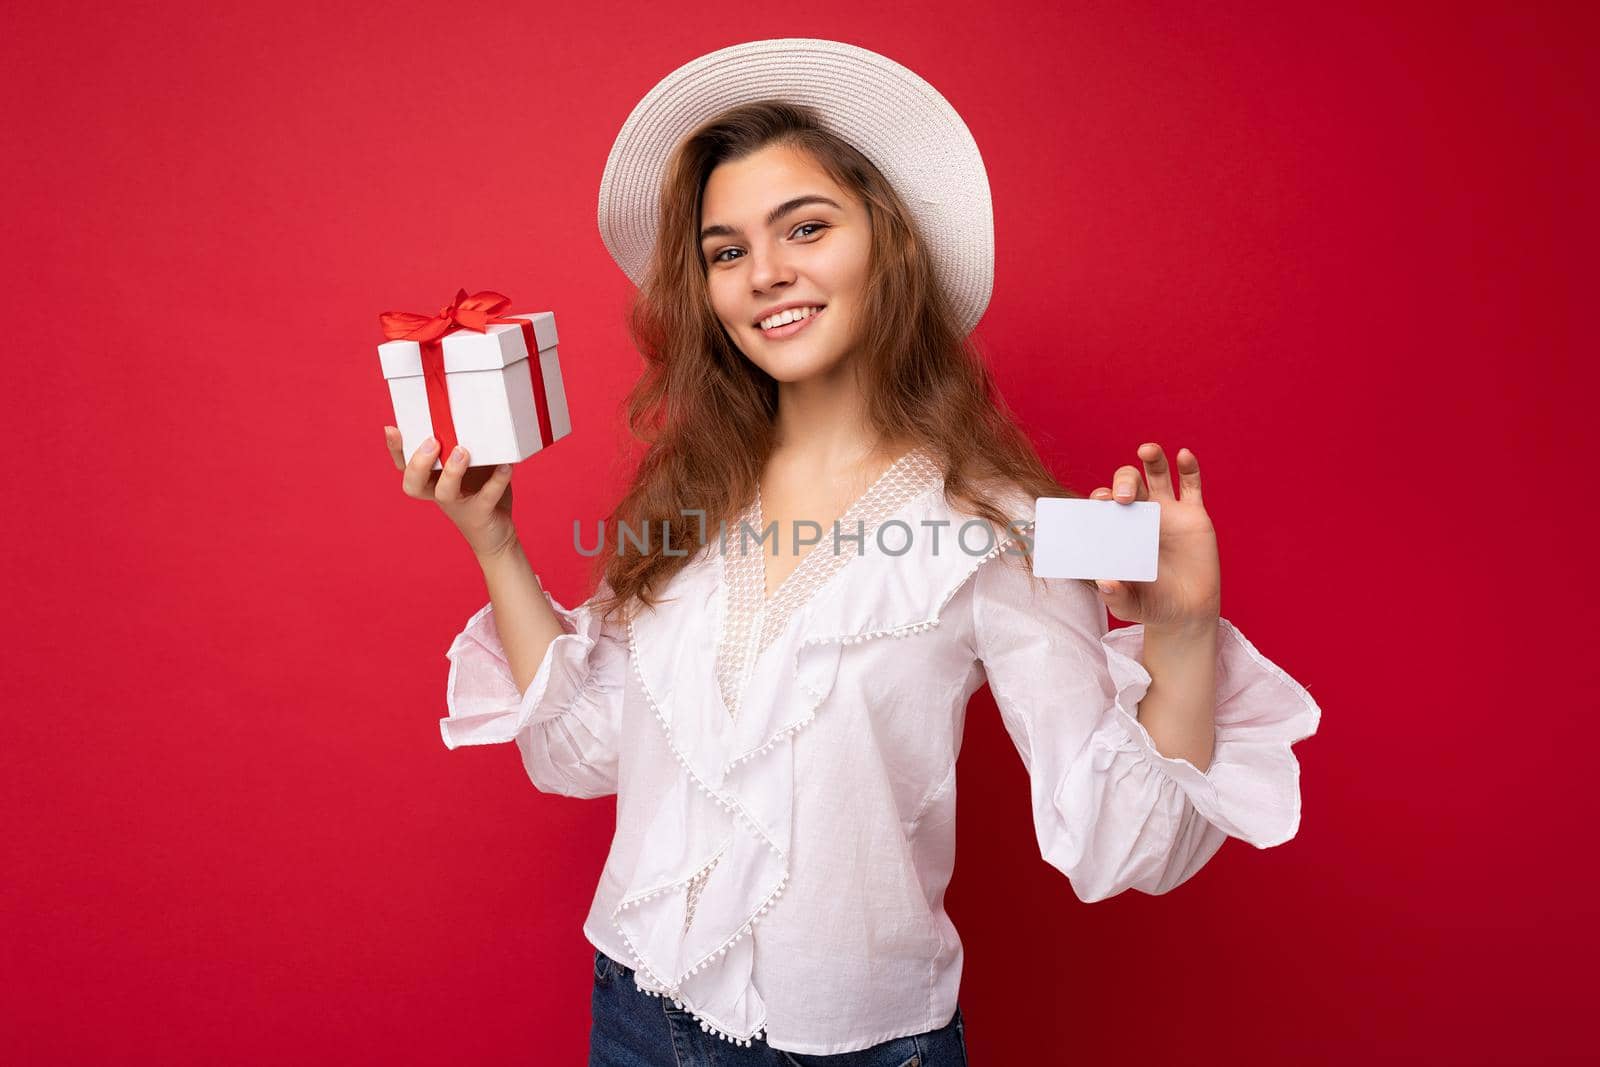 Portrait of positive cheerful fashionable woman in formalwear holding gift box and credit card looking at camera isolated on red background with copy space by TRMK